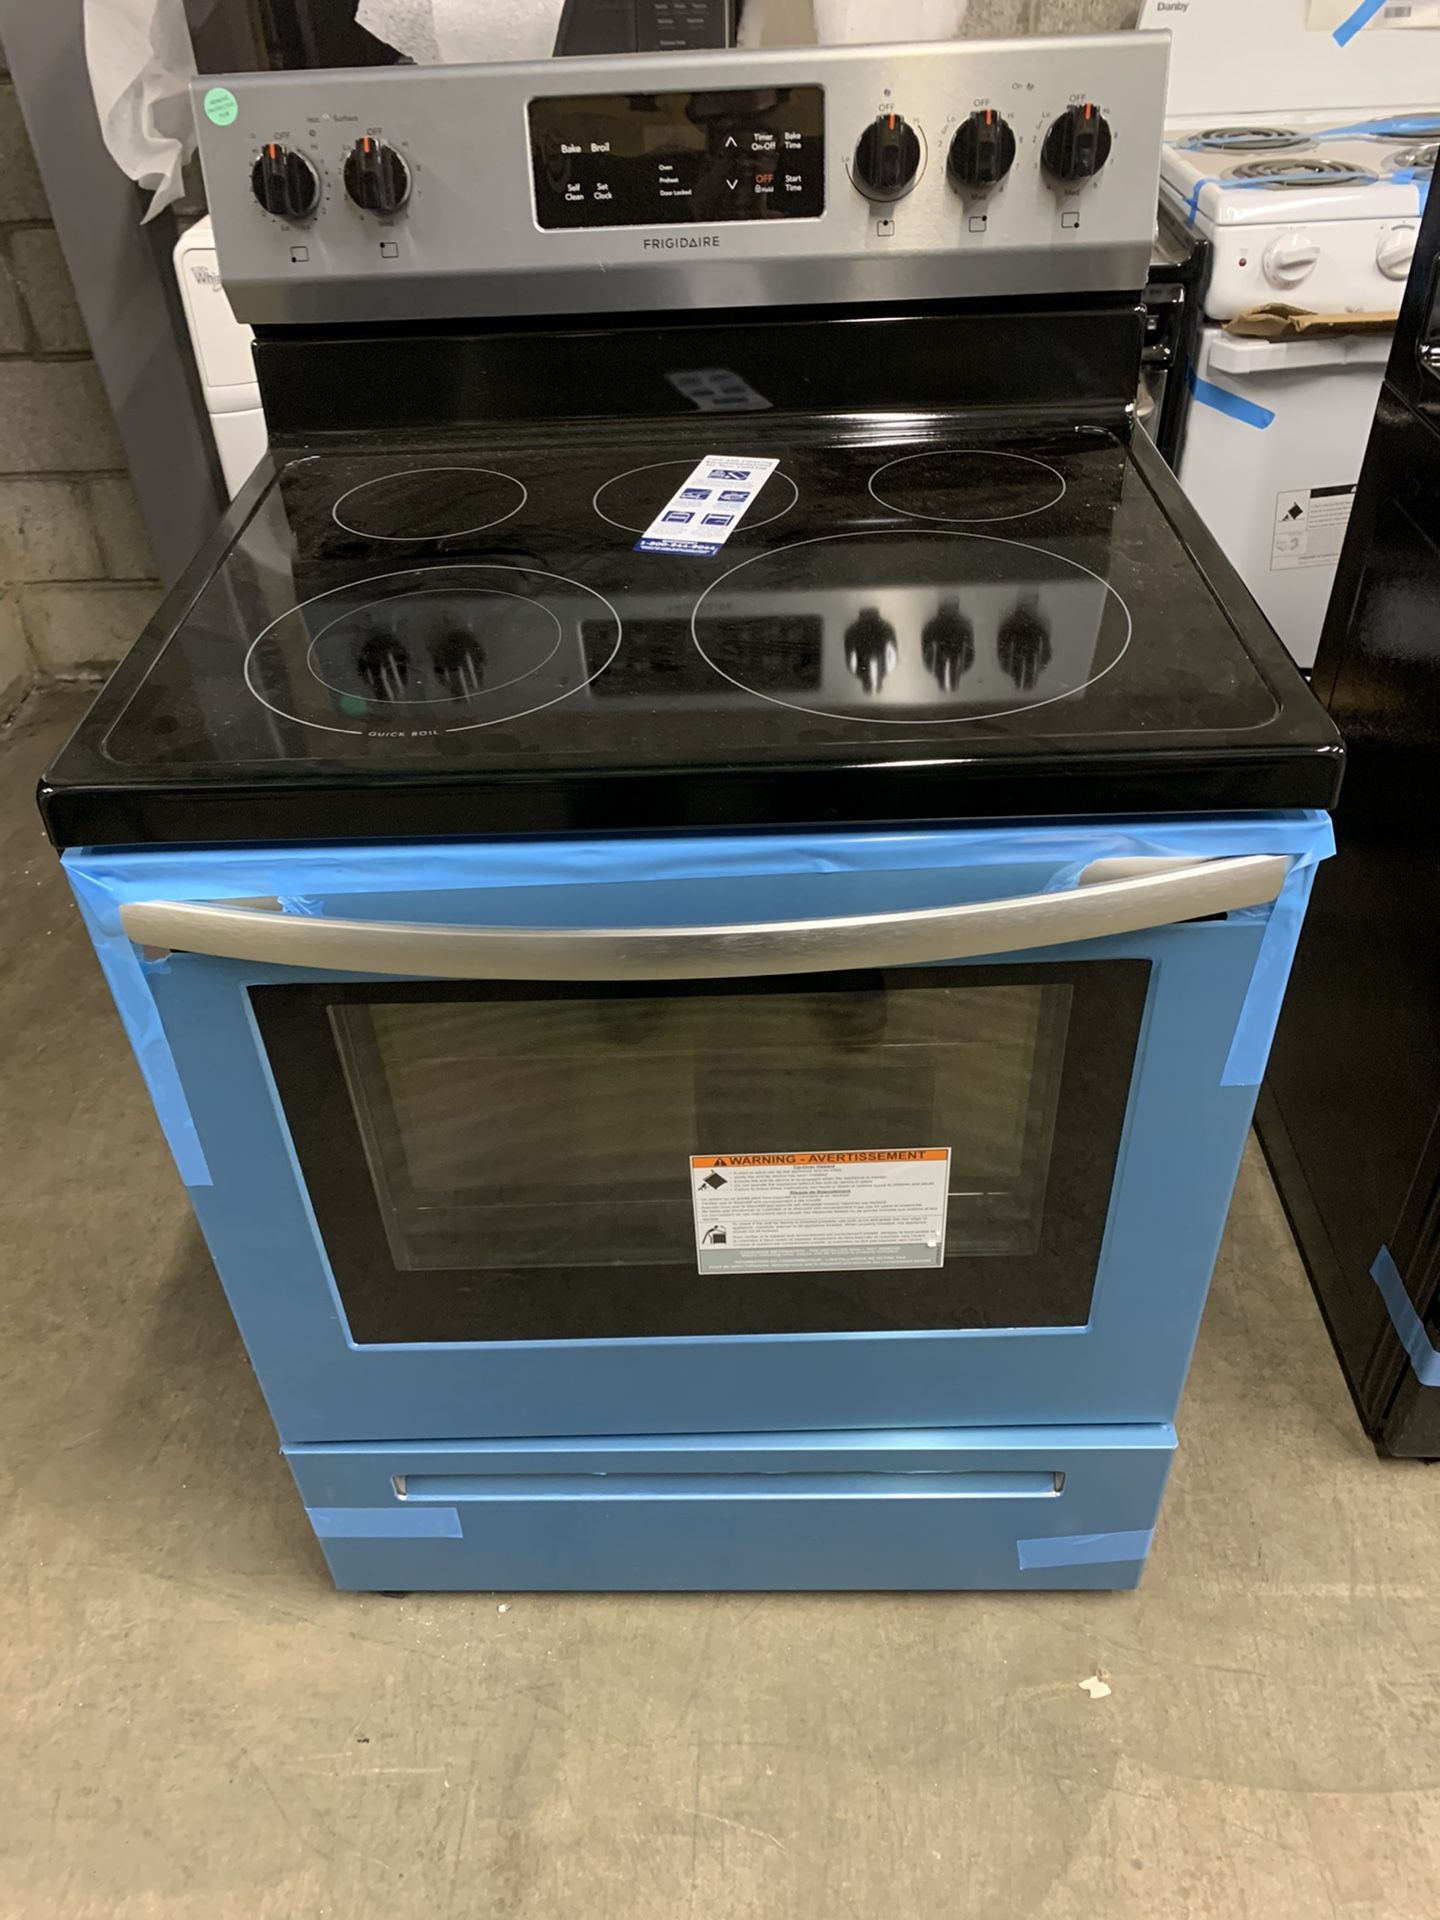 Frigidaire 30” Electric Range. STAINLESS STEEL. Model FFEF3054TS NEW SCRATCH N DENT